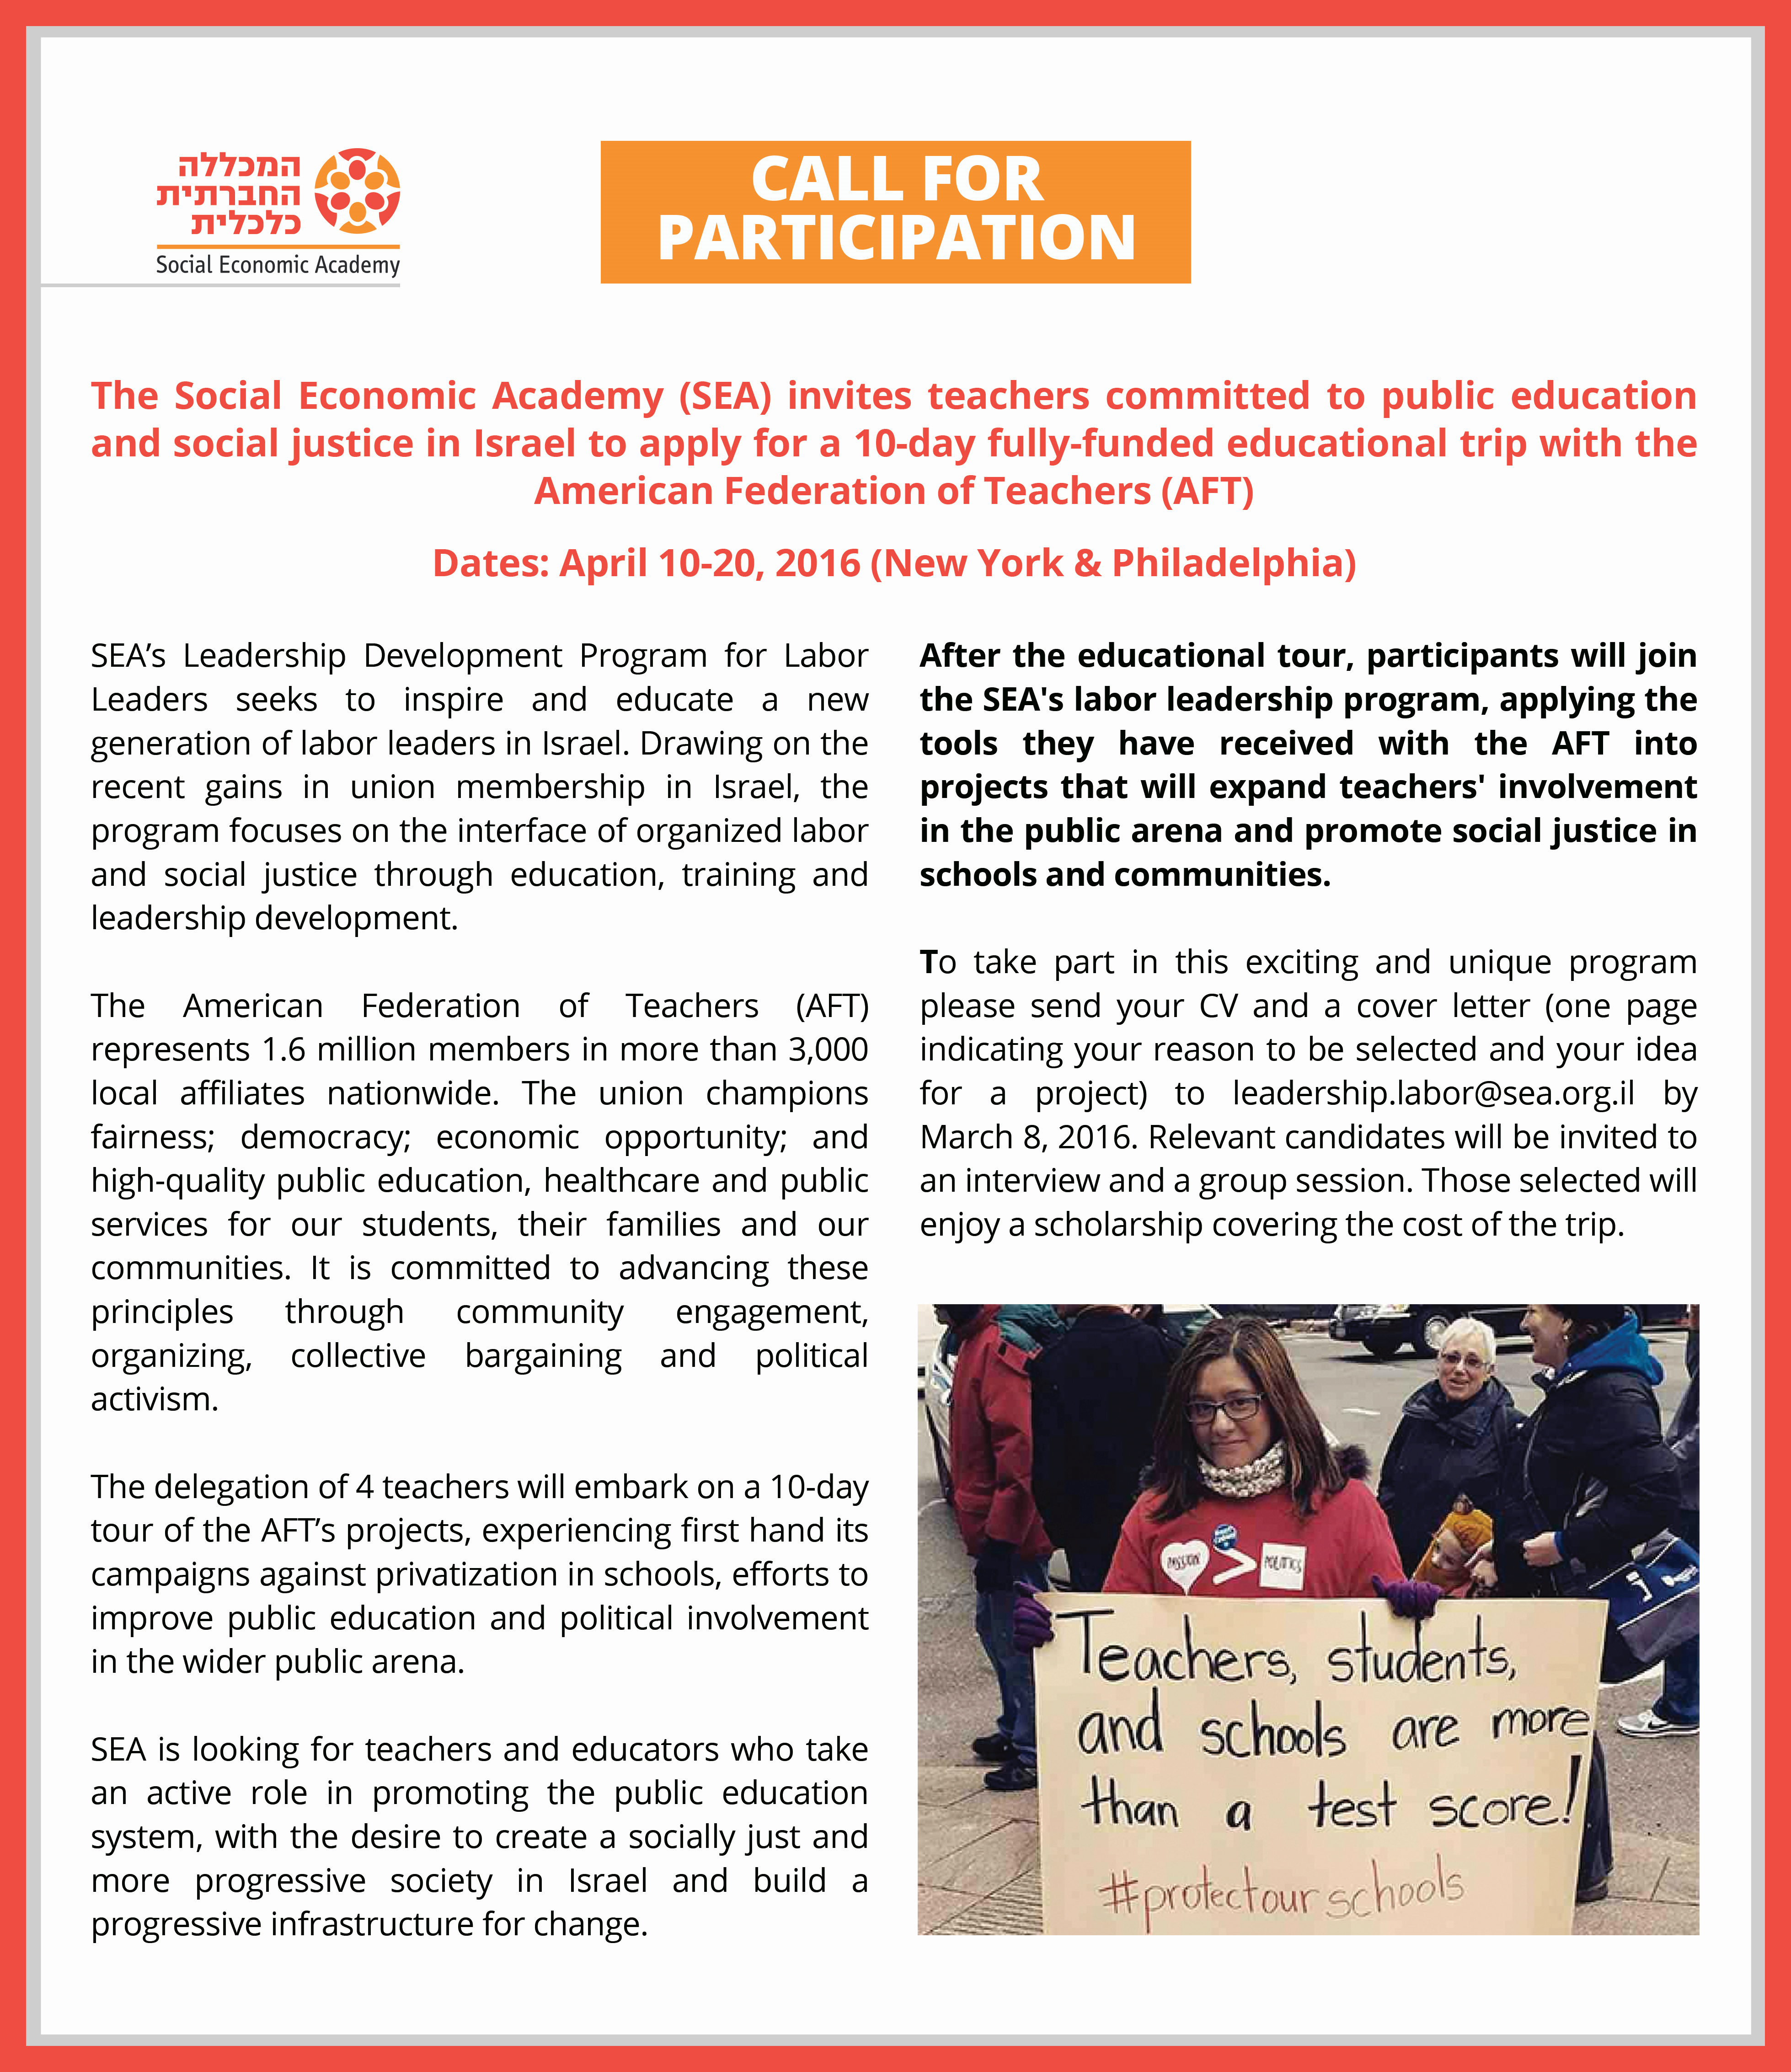 The call for participation published by the SEA